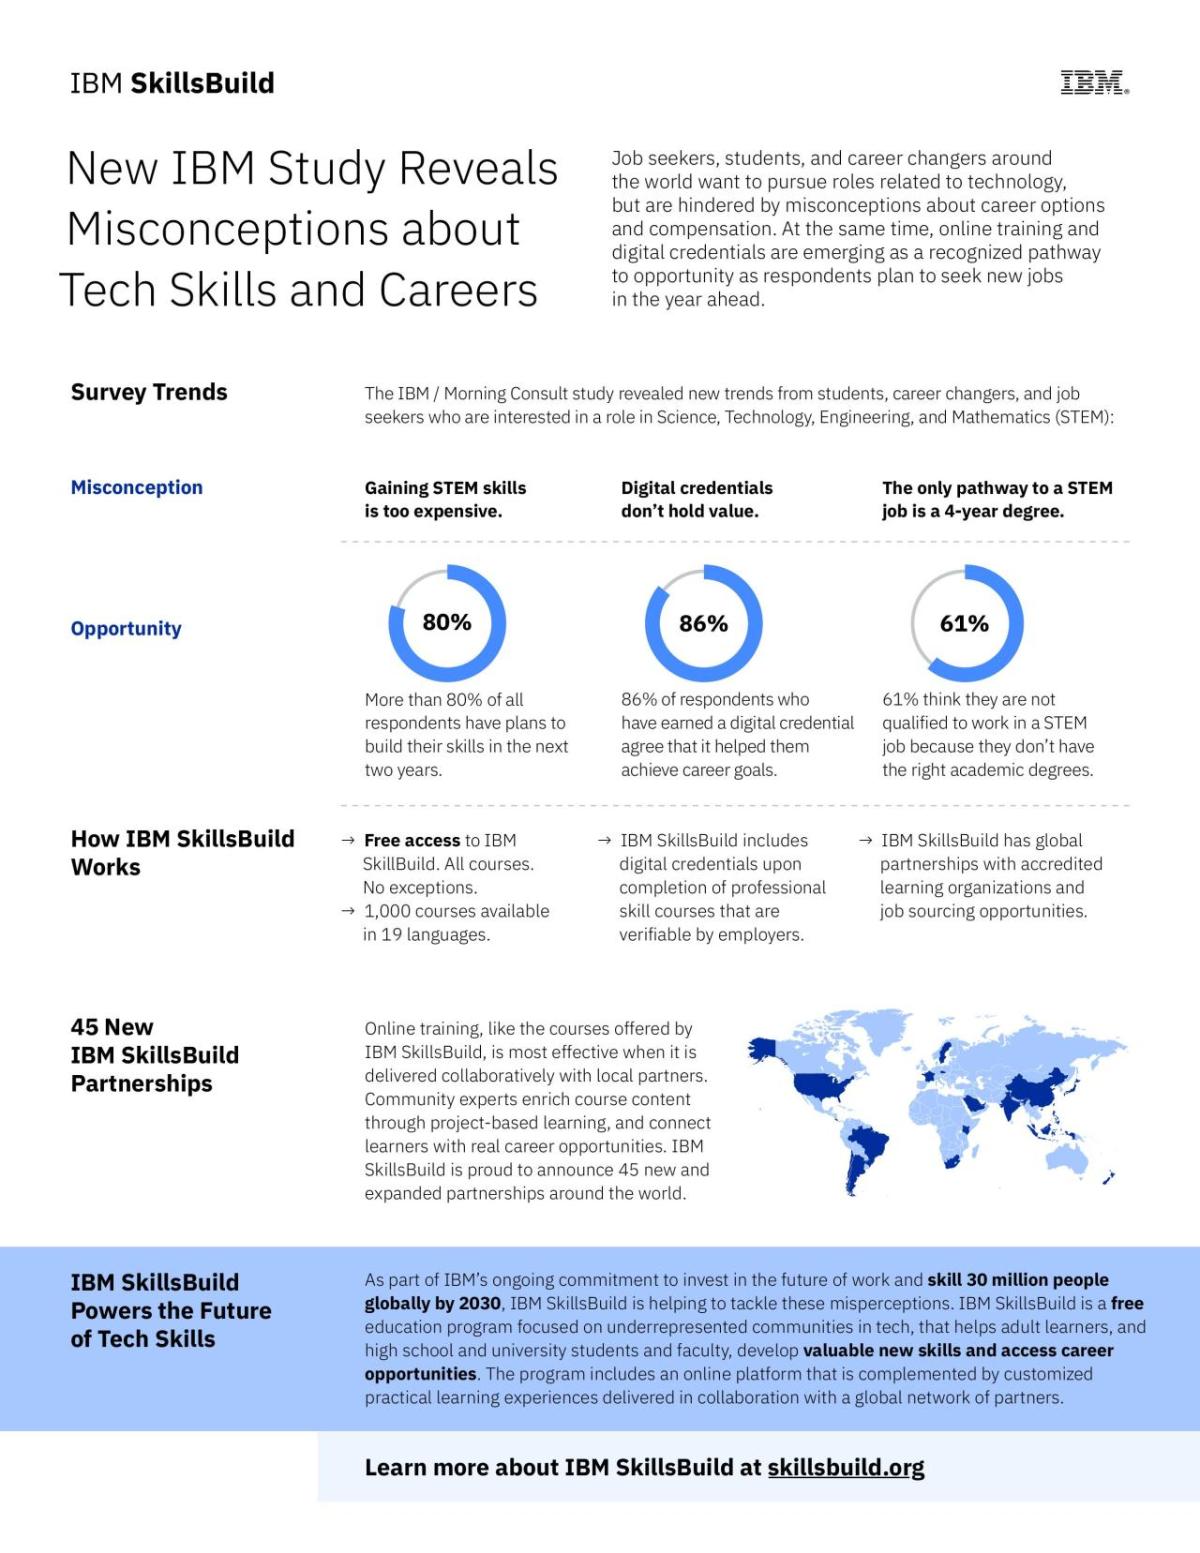 New IBM Study Reveals Misconceptions about Tech Skills and Careers Infographic